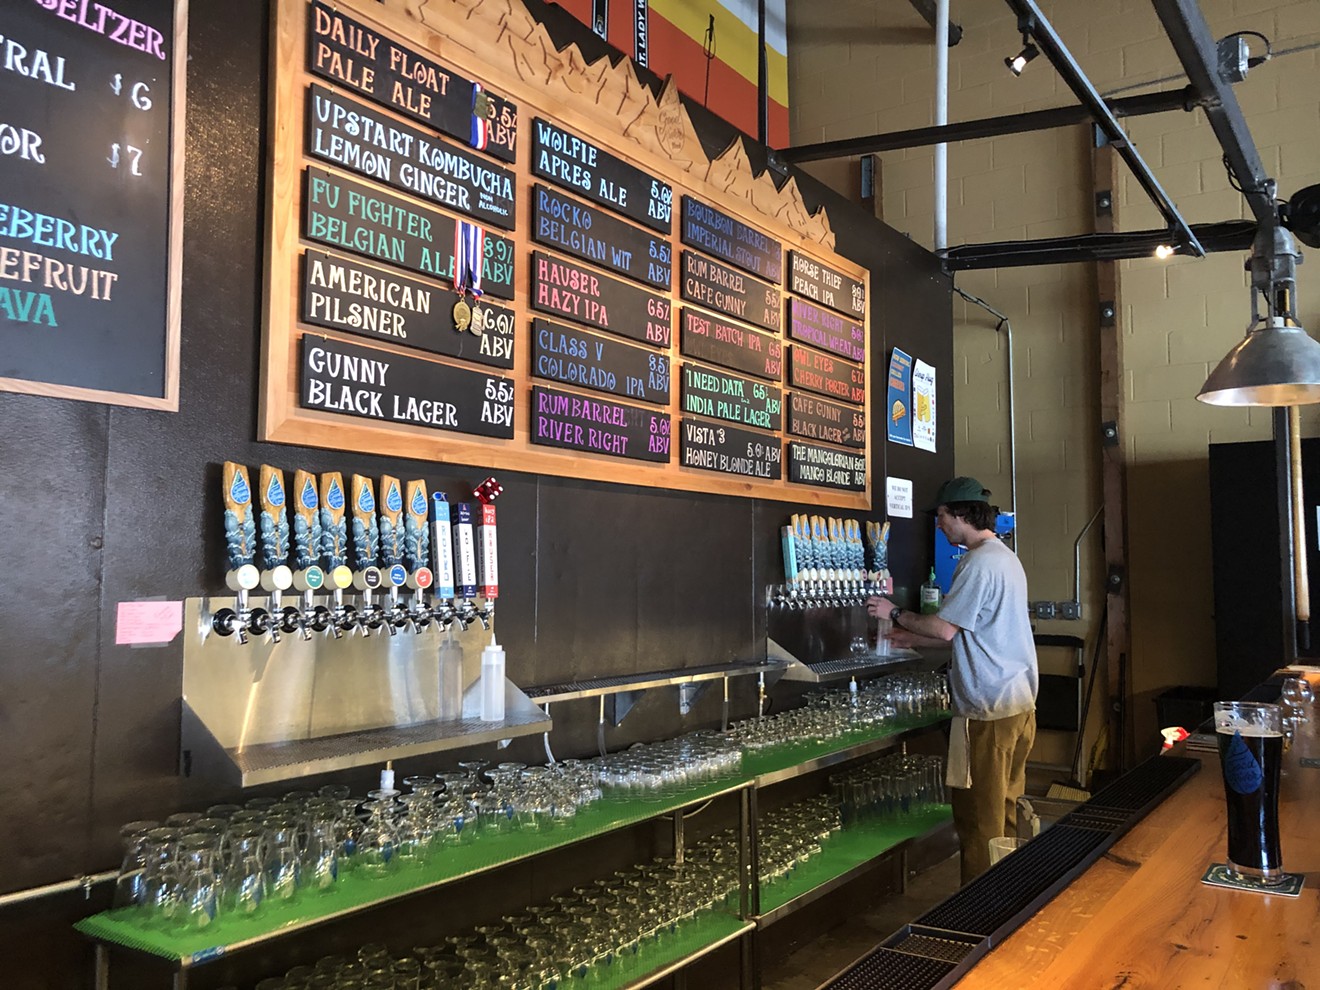 The Good River Beer taproom also features beer from Rocky Mountain Sector, including Hauser Hazy IPA.